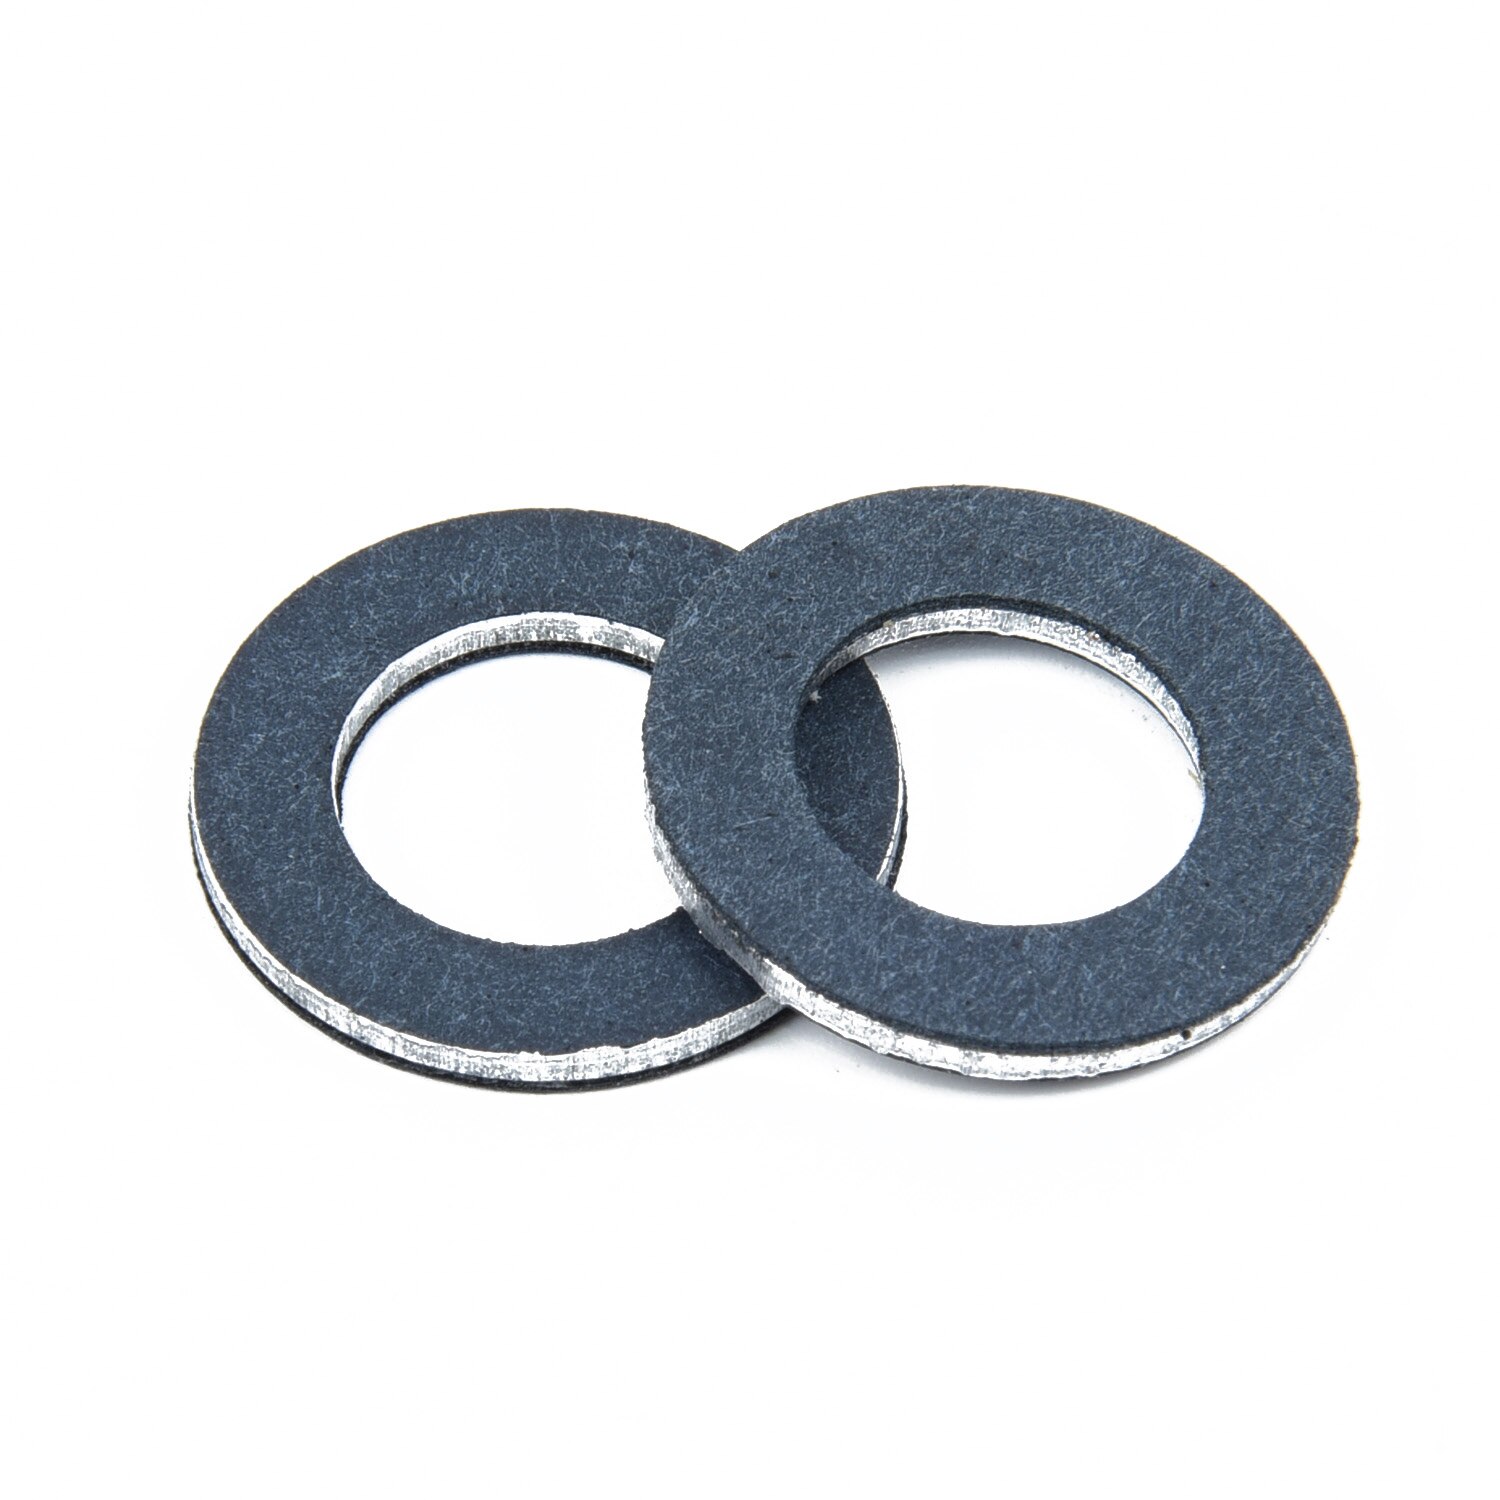 Washers Washer Gasket Rings Replacement 10 PCS Blue O-ring Gasket Part